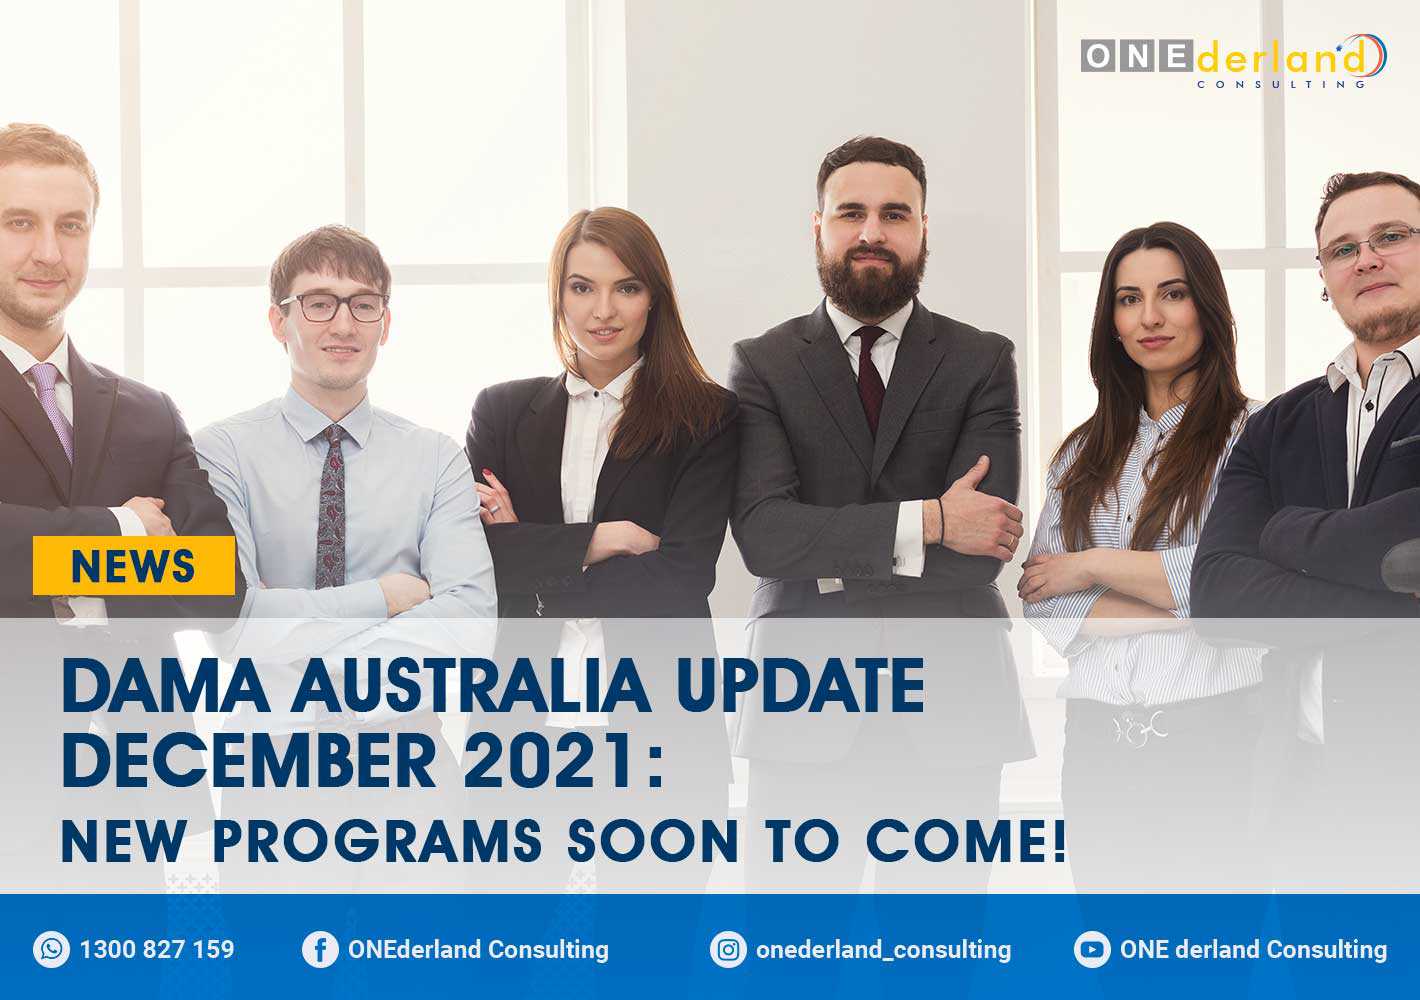 Two New DAMA Programs Will Be Opened: Business can Access the Program in 2022!